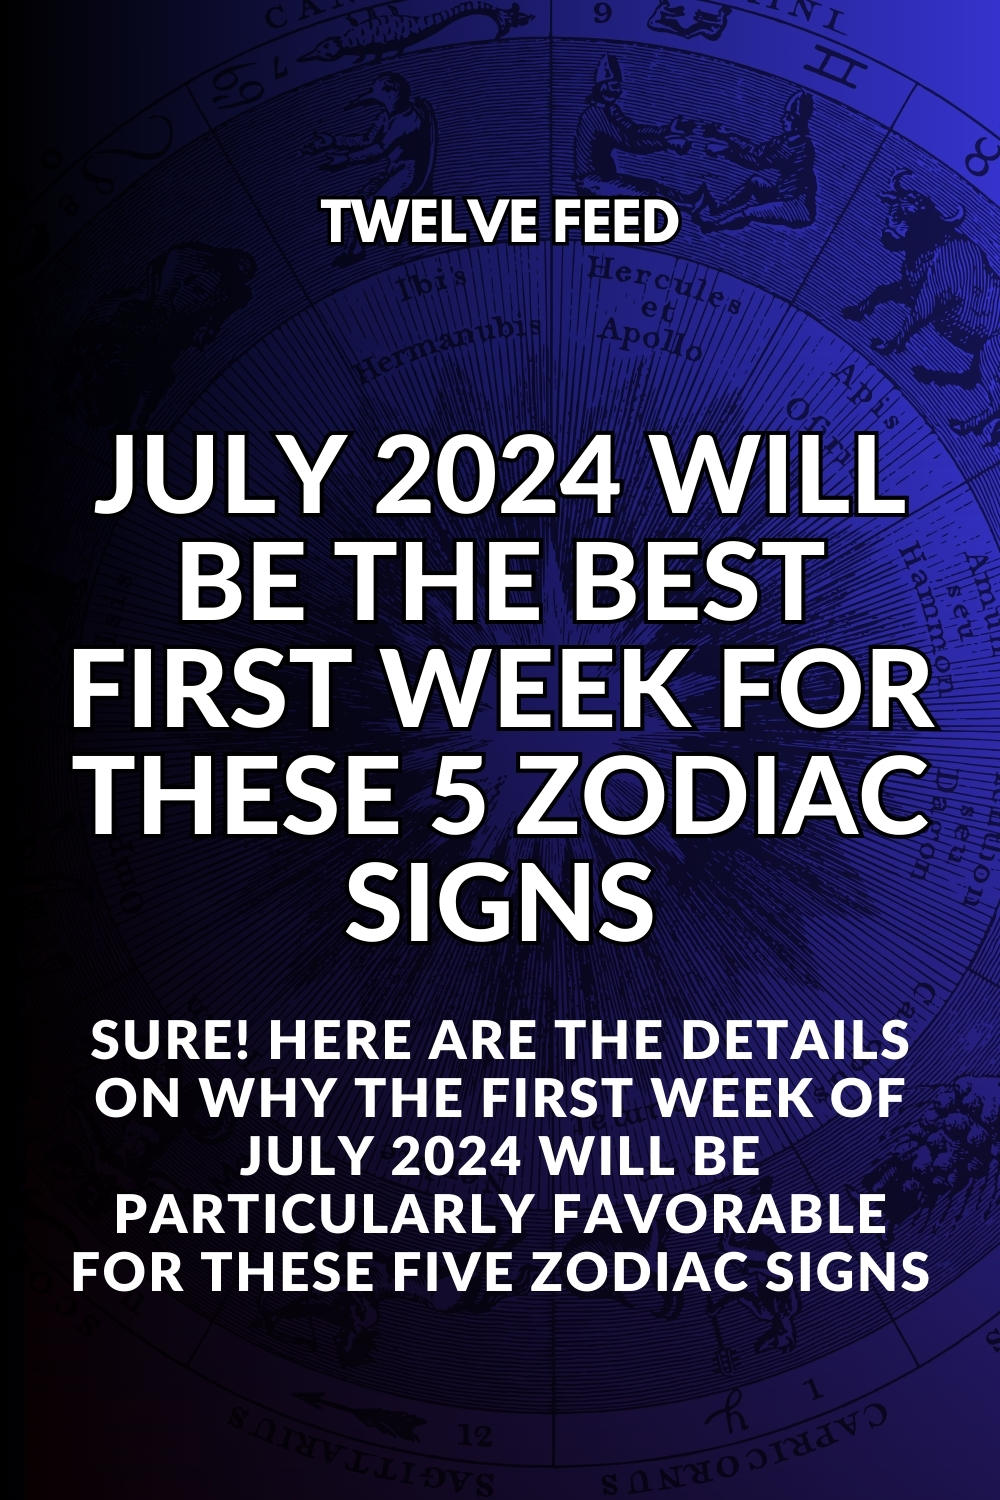 July 2024 Will Be The Best First Week For These 5 Zodiac Signs